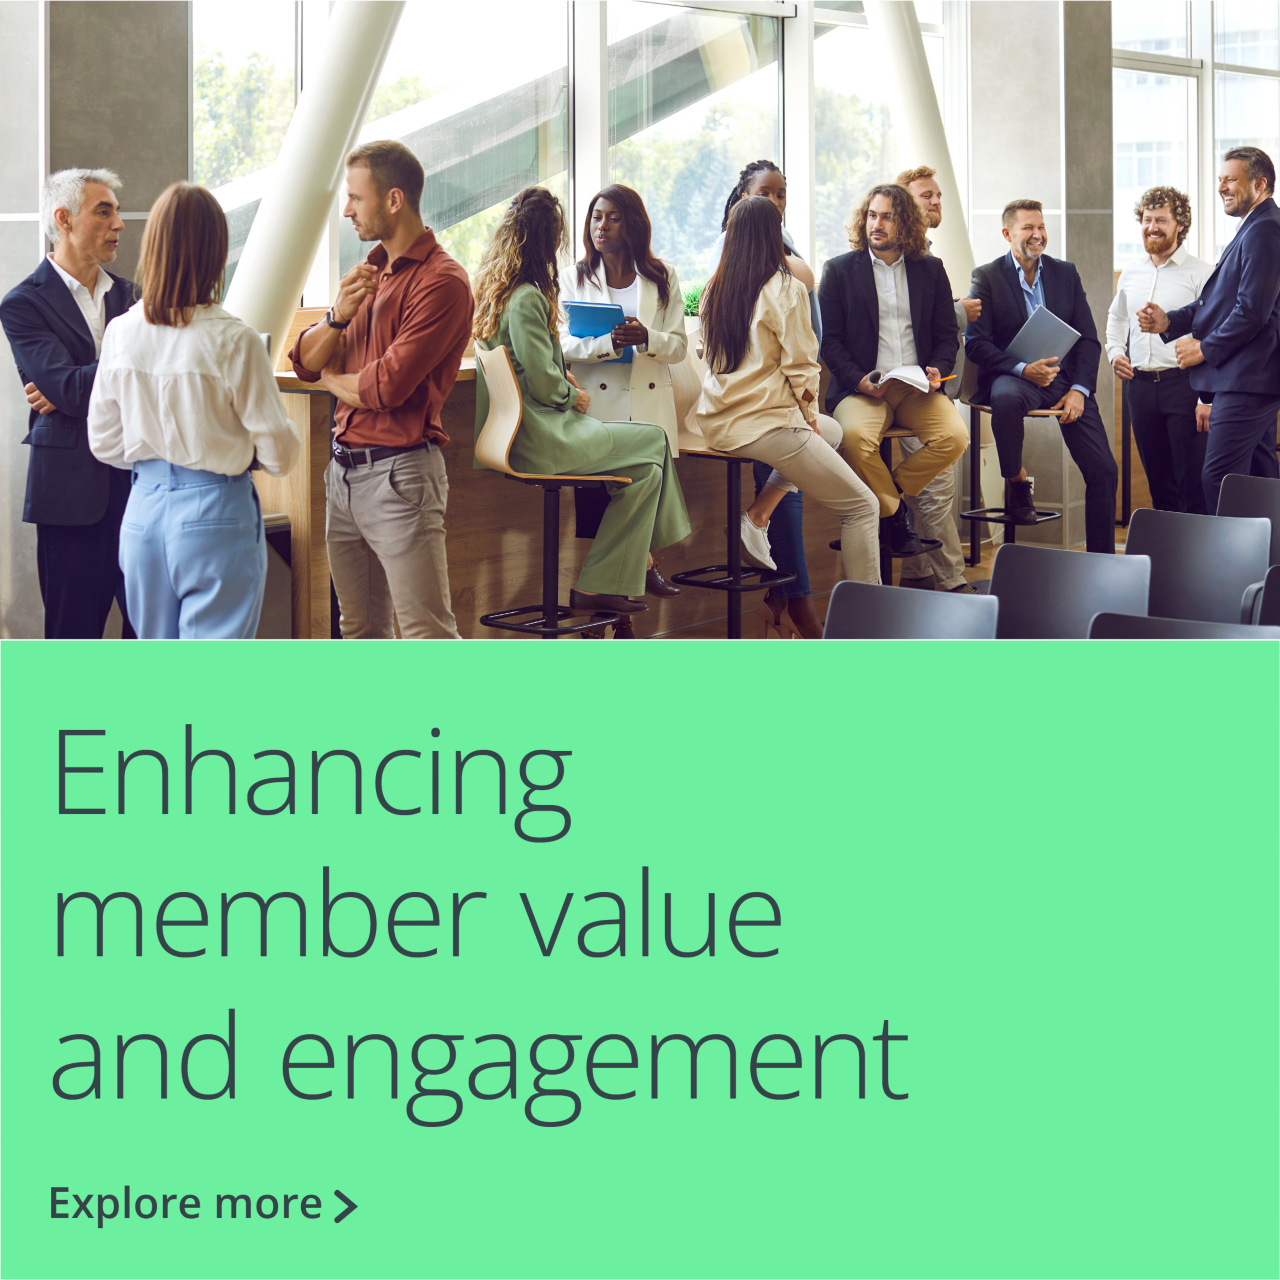 Section 3: Enhancing member value and engagement